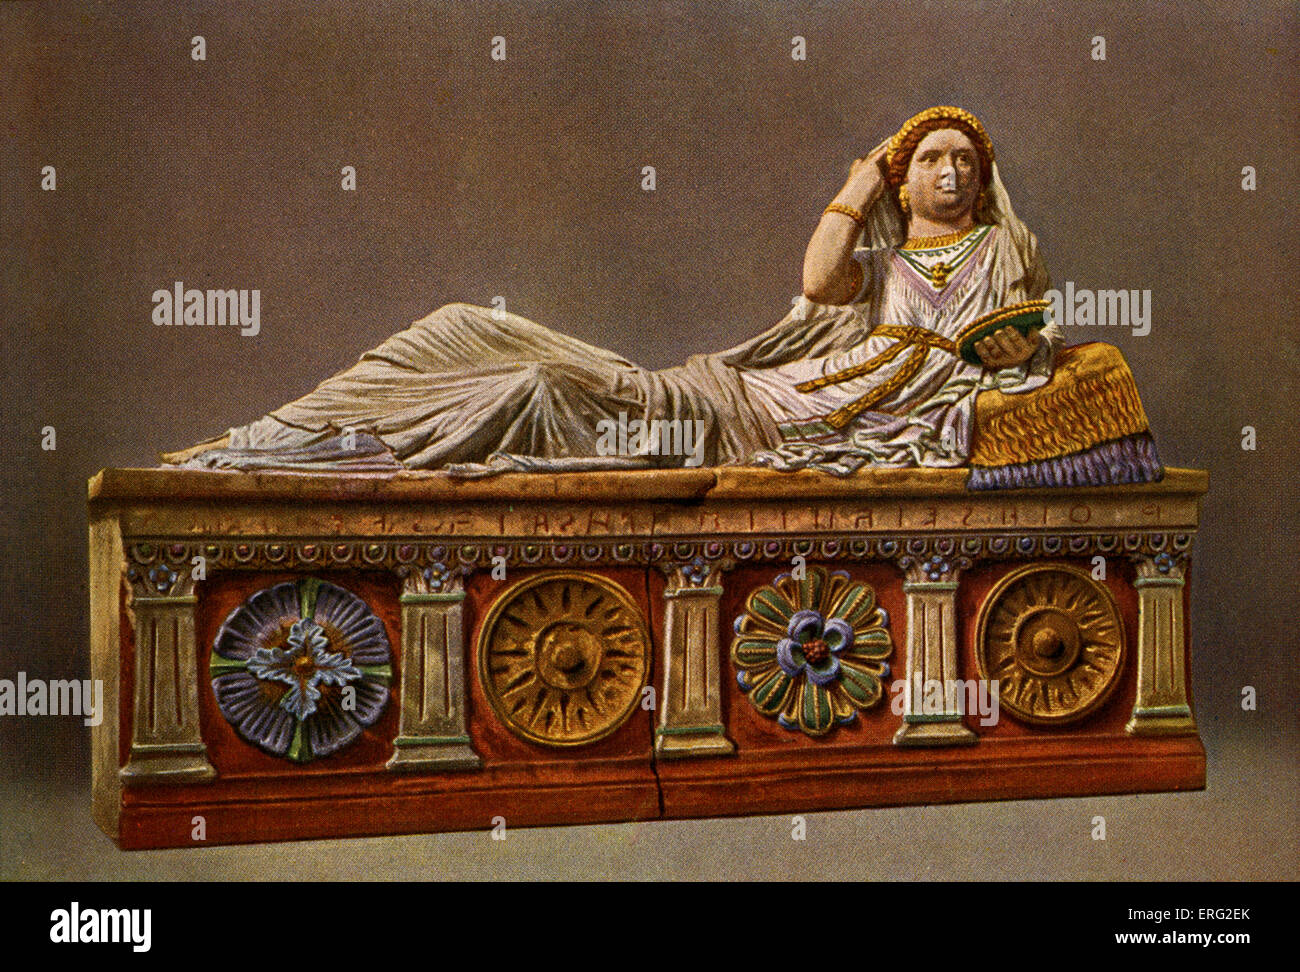 Painted Etruscan sarcophagus, showing a reclining woman with decorative bosses and columns. Found at Chiusi. Stock Photo